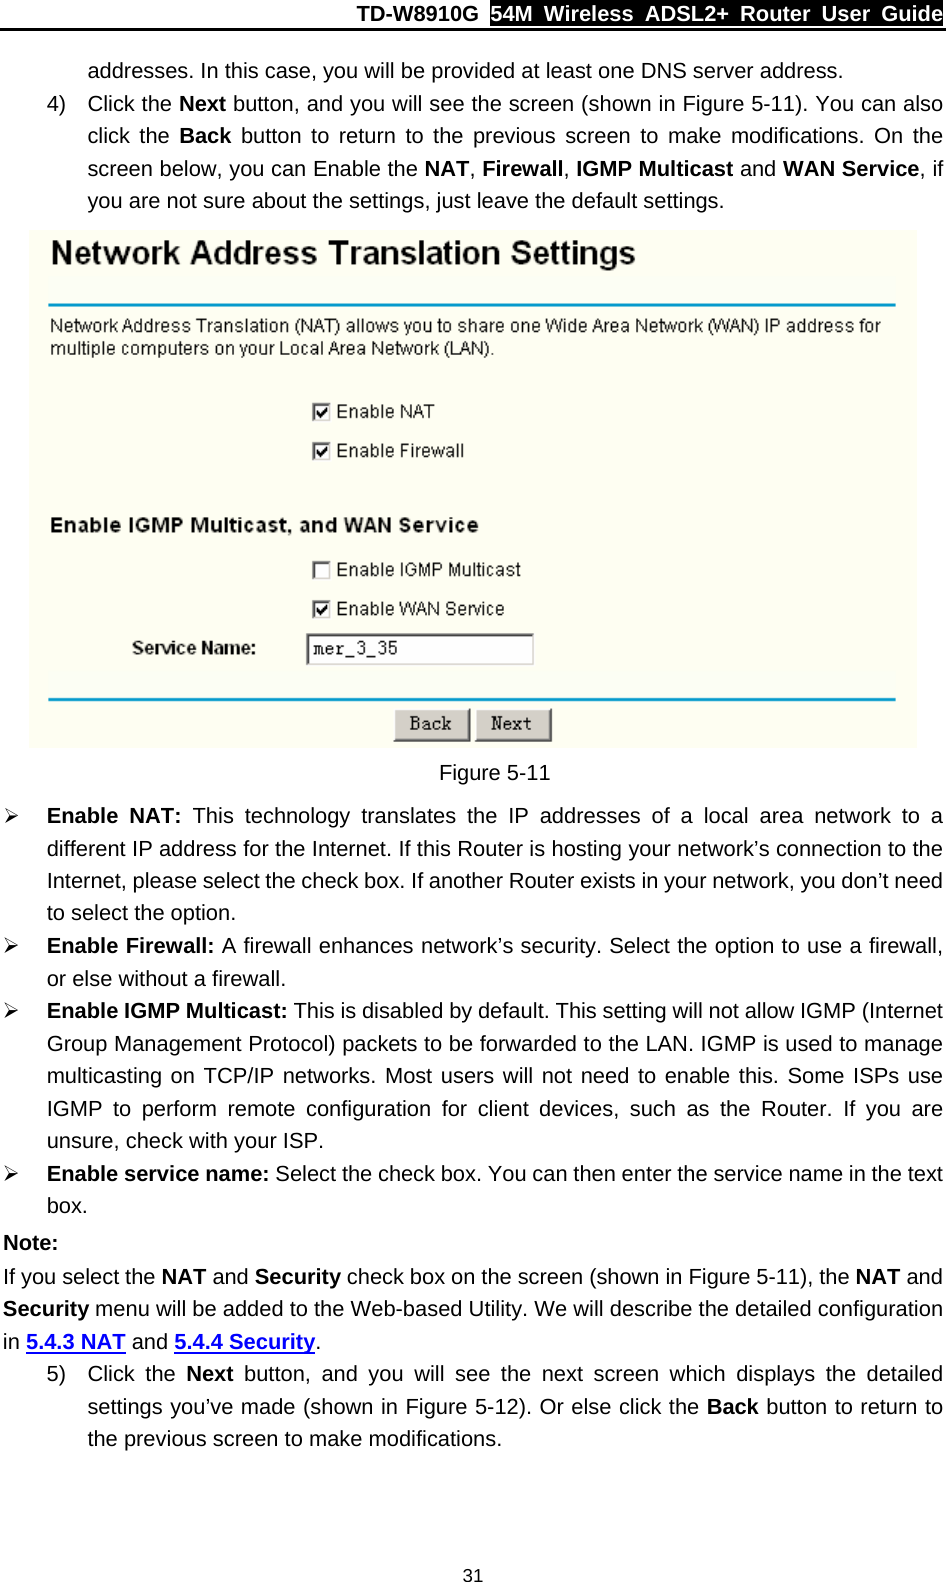 TD-W8910G  54M Wireless ADSL2+ Router User Guide  31addresses. In this case, you will be provided at least one DNS server address. 4) Click the Next button, and you will see the screen (shown in Figure 5-11). You can also click the Back button to return to the previous screen to make modifications. On the screen below, you can Enable the NAT, Firewall, IGMP Multicast and WAN Service, if you are not sure about the settings, just leave the default settings.  Figure 5-11 ¾ Enable NAT: This technology translates the IP addresses of a local area network to a different IP address for the Internet. If this Router is hosting your network’s connection to the Internet, please select the check box. If another Router exists in your network, you don’t need to select the option. ¾ Enable Firewall: A firewall enhances network’s security. Select the option to use a firewall, or else without a firewall. ¾ Enable IGMP Multicast: This is disabled by default. This setting will not allow IGMP (Internet Group Management Protocol) packets to be forwarded to the LAN. IGMP is used to manage multicasting on TCP/IP networks. Most users will not need to enable this. Some ISPs use IGMP to perform remote configuration for client devices, such as the Router. If you are unsure, check with your ISP. ¾ Enable service name: Select the check box. You can then enter the service name in the text box. Note: If you select the NAT and Security check box on the screen (shown in Figure 5-11), the NAT and Security menu will be added to the Web-based Utility. We will describe the detailed configuration in 5.4.3 NAT and 5.4.4 Security. 5) Click the Next button, and you will see the next screen which displays the detailed settings you’ve made (shown in Figure 5-12). Or else click the Back button to return to the previous screen to make modifications. 